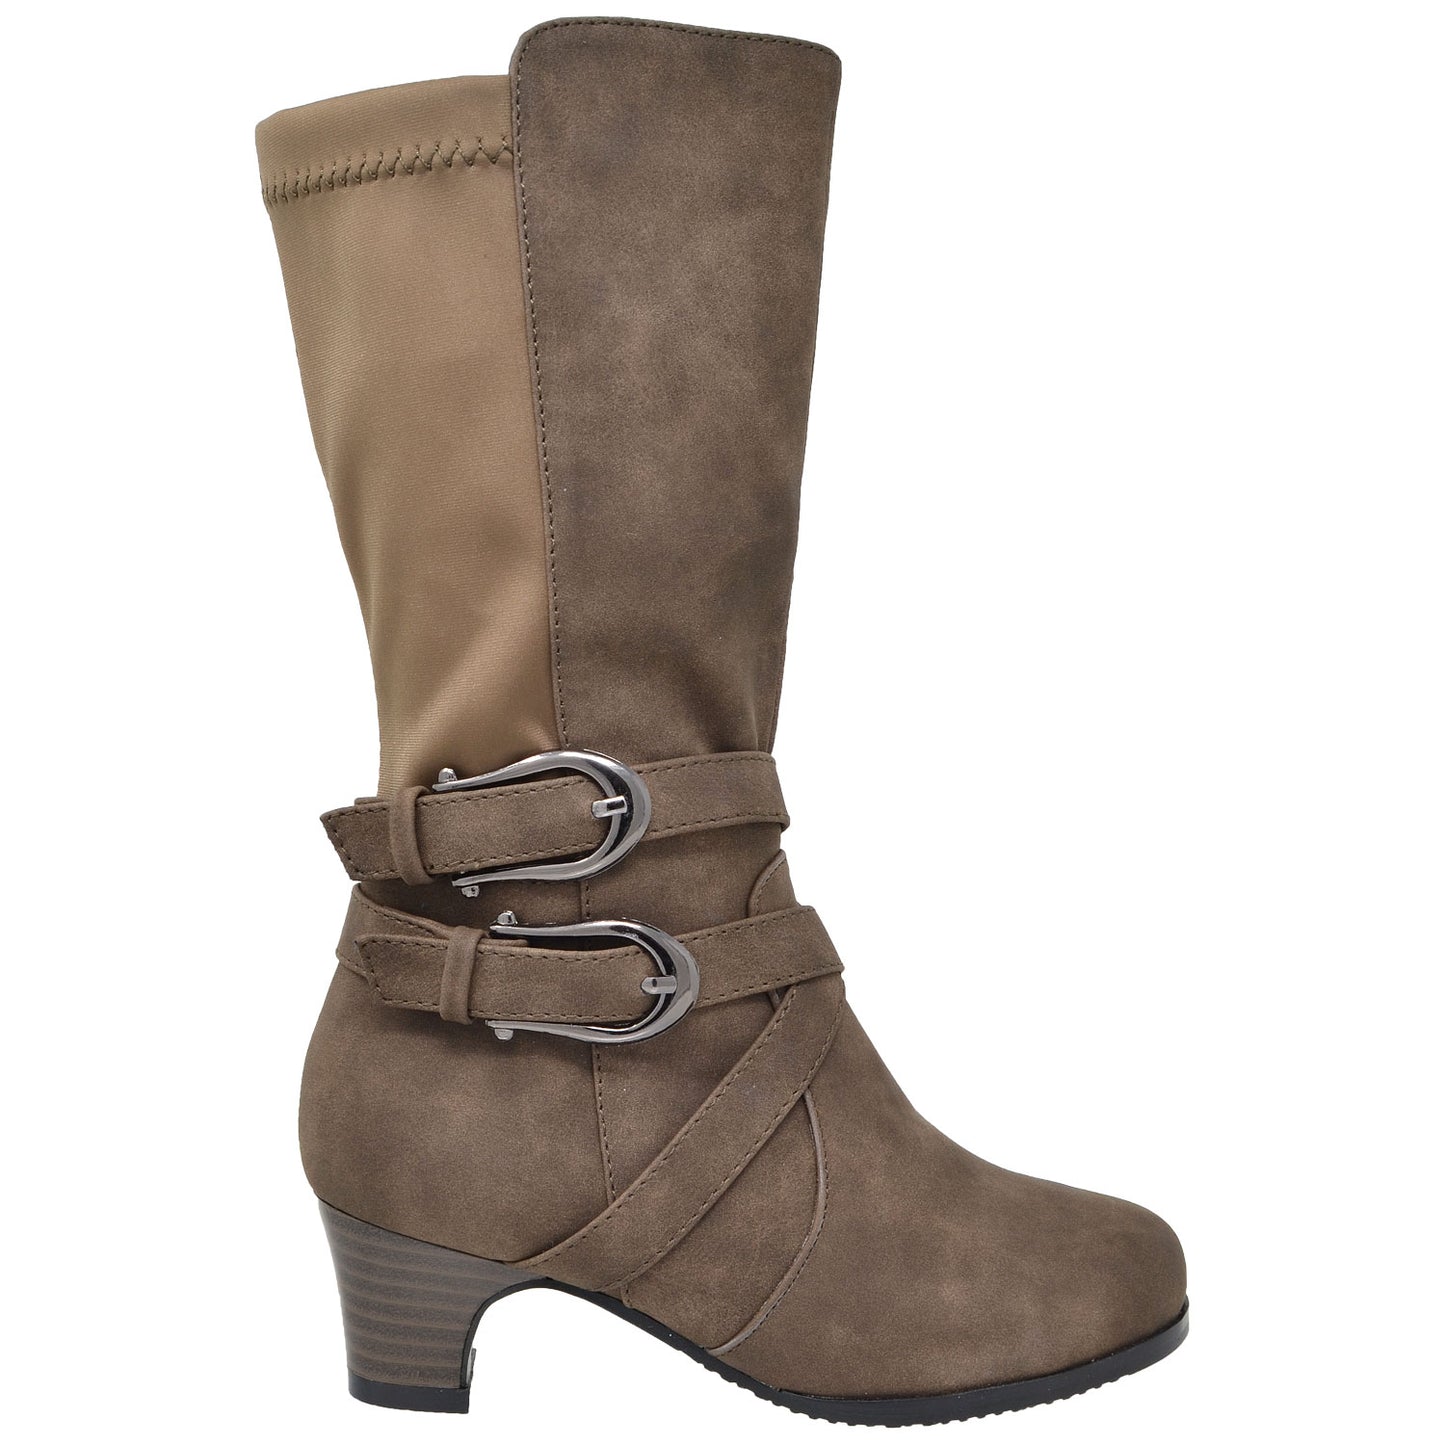 Toddler & Youth Strappy Heeled Mid Calf Boot